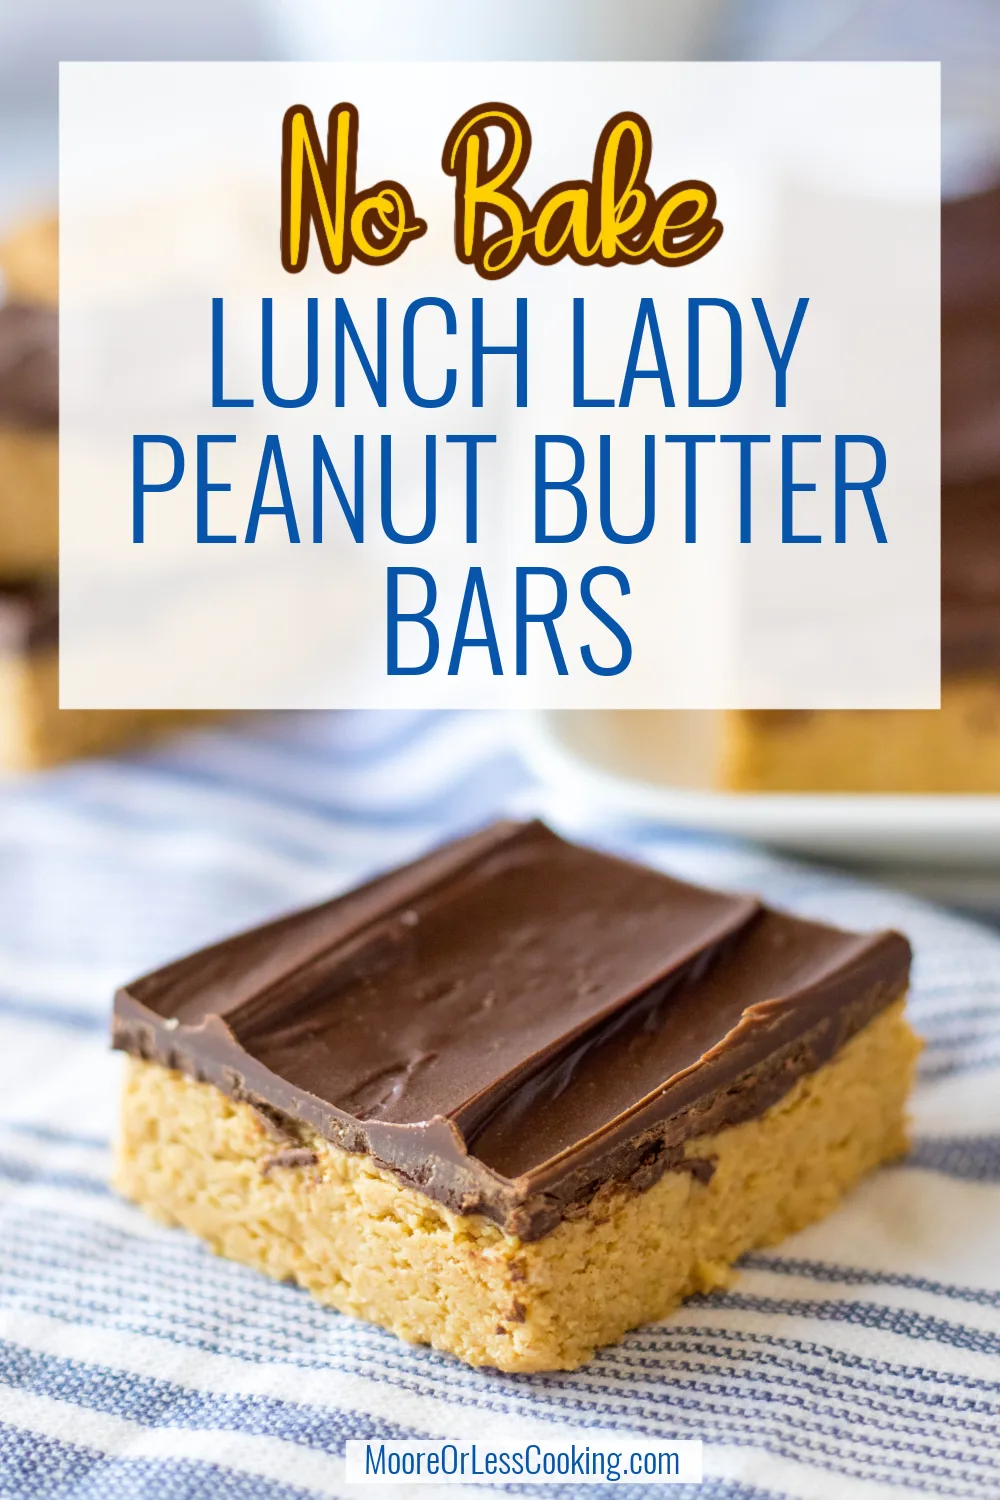 Lunch Lady Peanut Butter Bars - House of Nash Eats